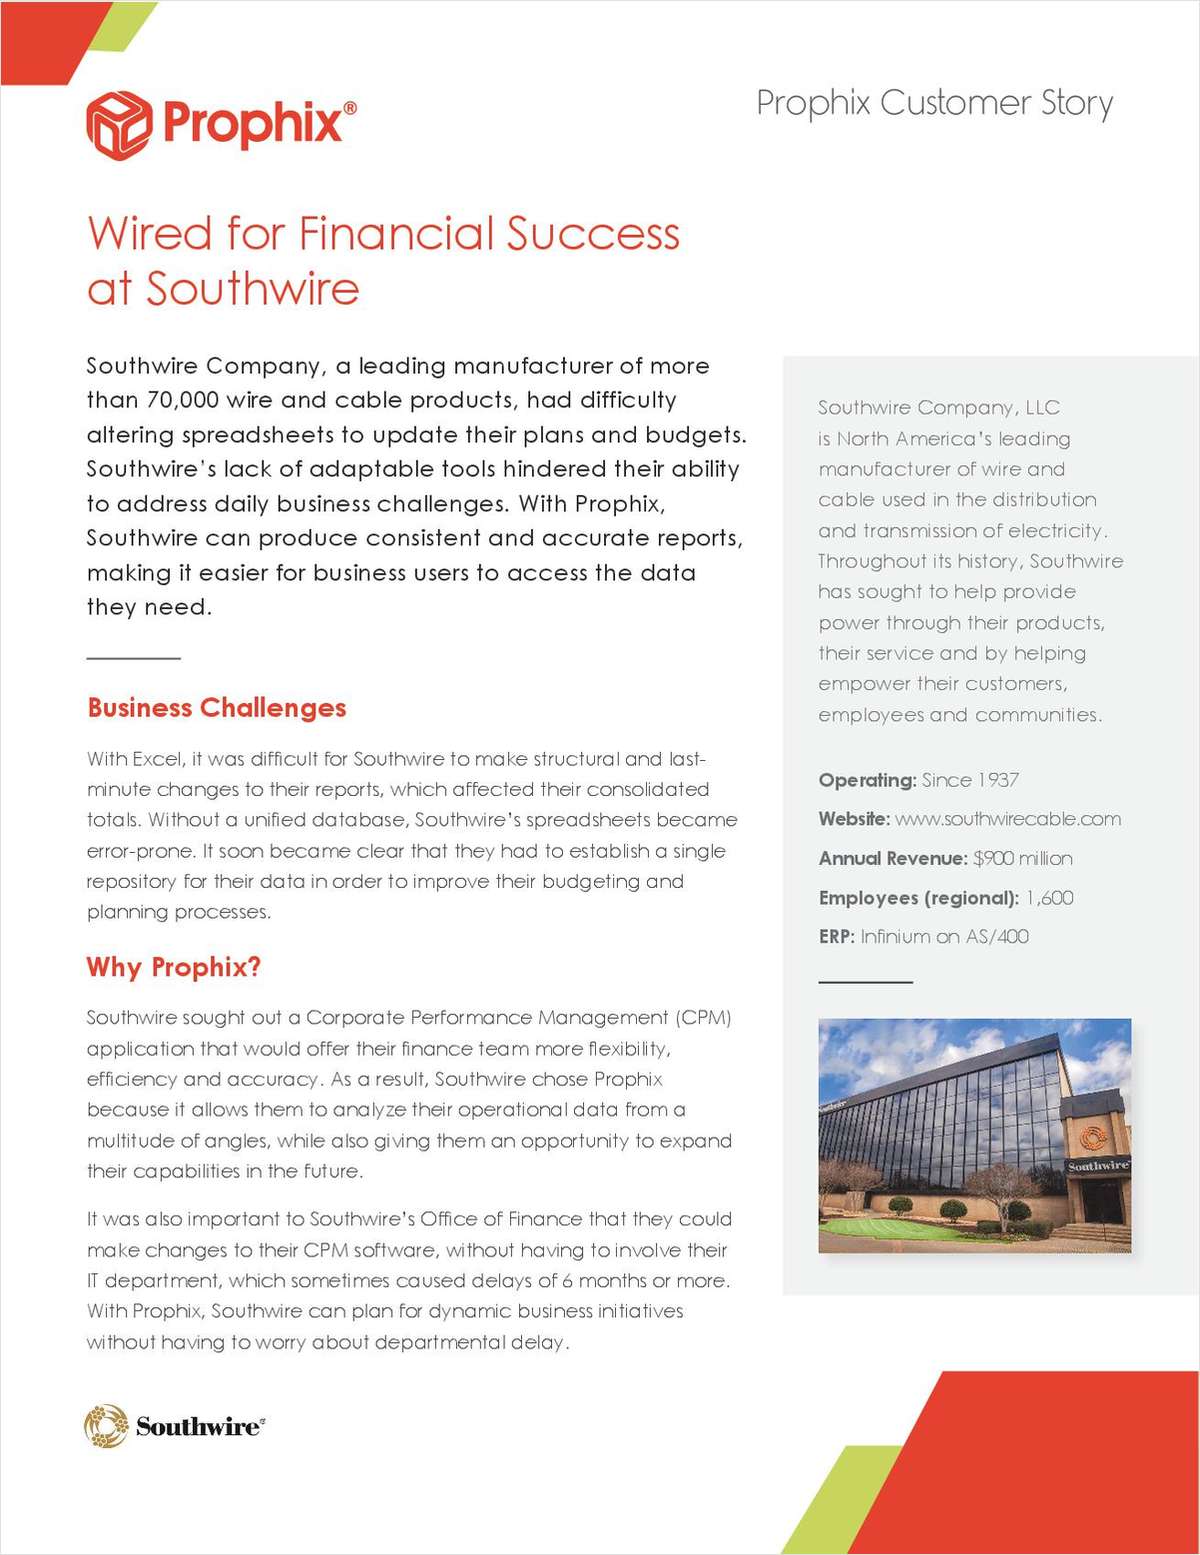 Wired for Financial Success at Southwire